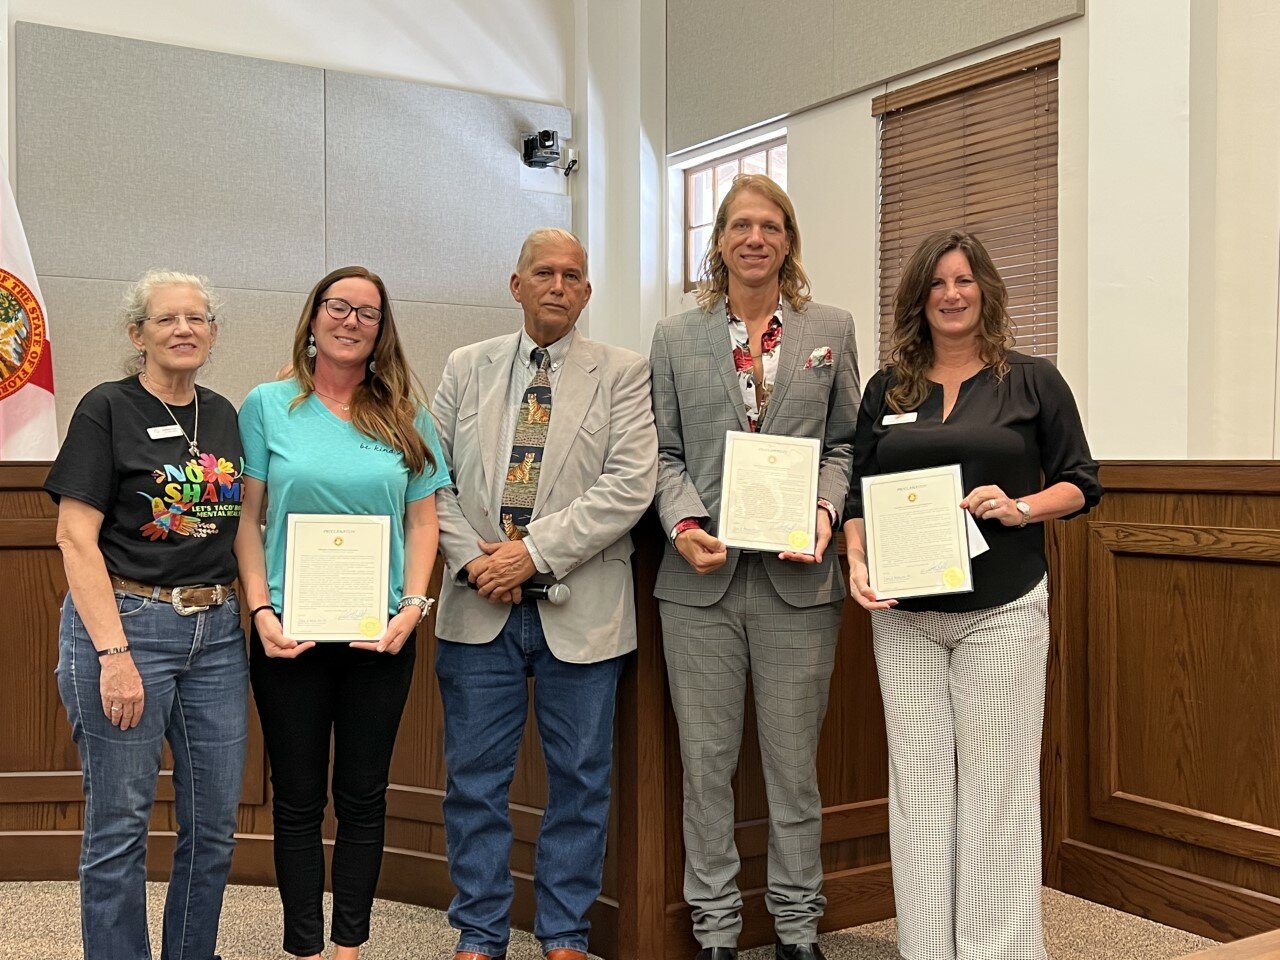 OKEECHOBEE – At their May 11 meeting, the Okeechobee County Commissioners proclaimed May as Mental Health Awareness Month at the request of Our Village, 211 Helpline and Suncoast Mental Health.